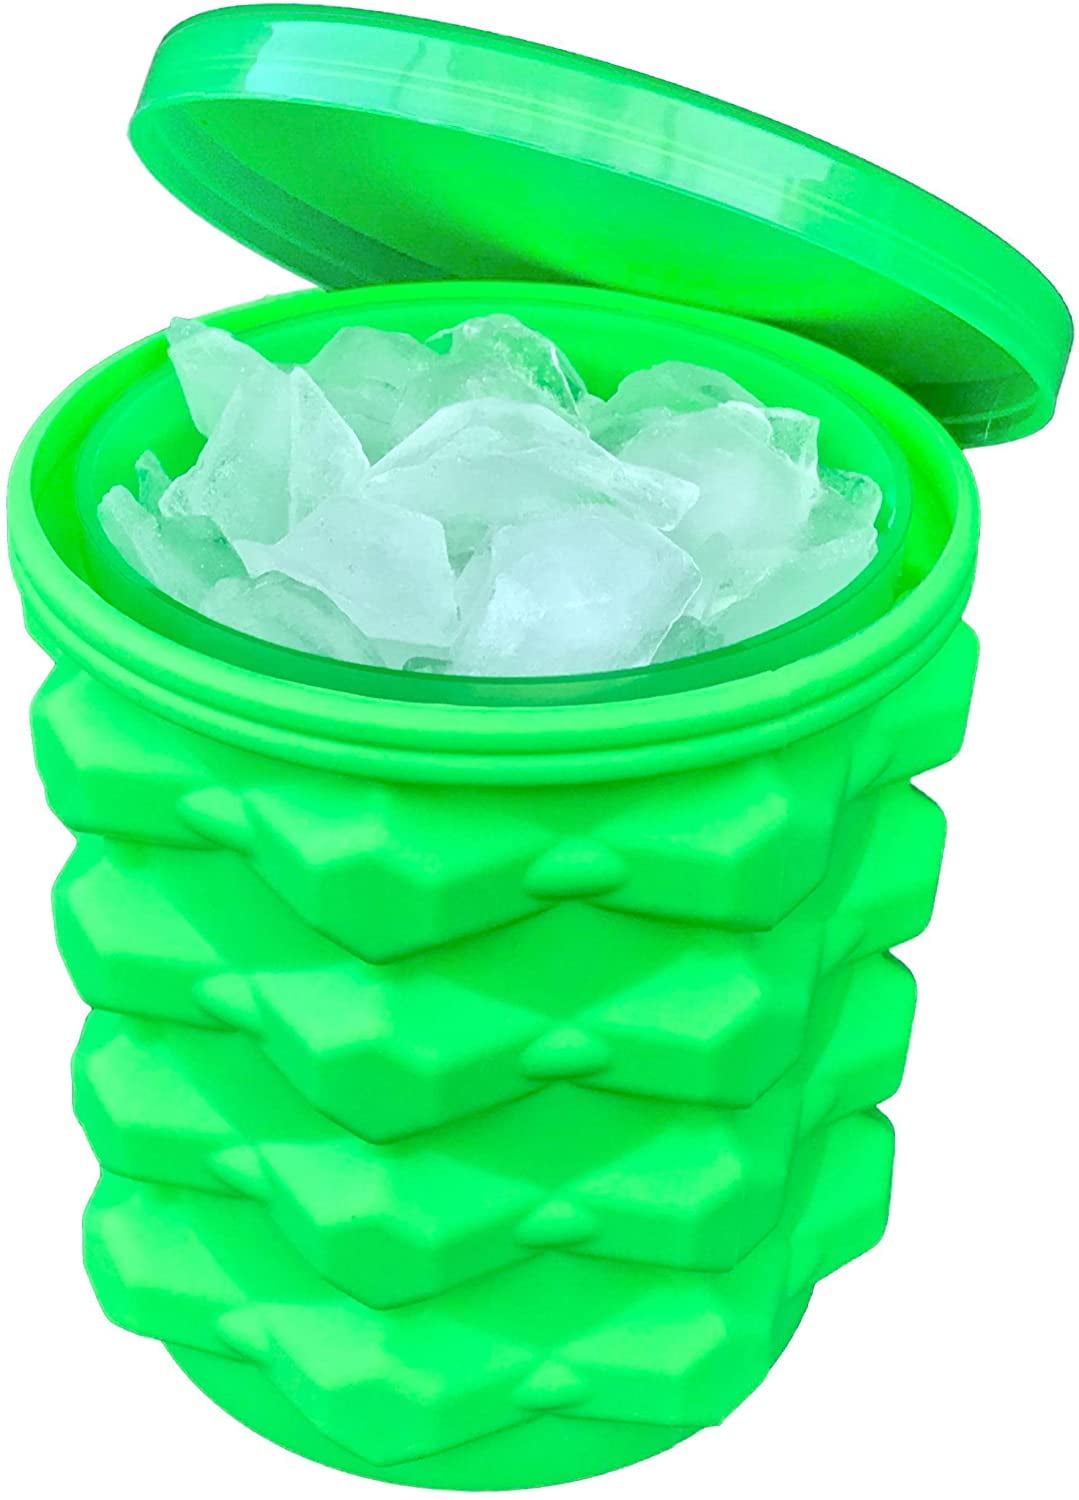 Ice Cube Maker Bucket Mold Cooler Makes Small Nugget Ice Chips for